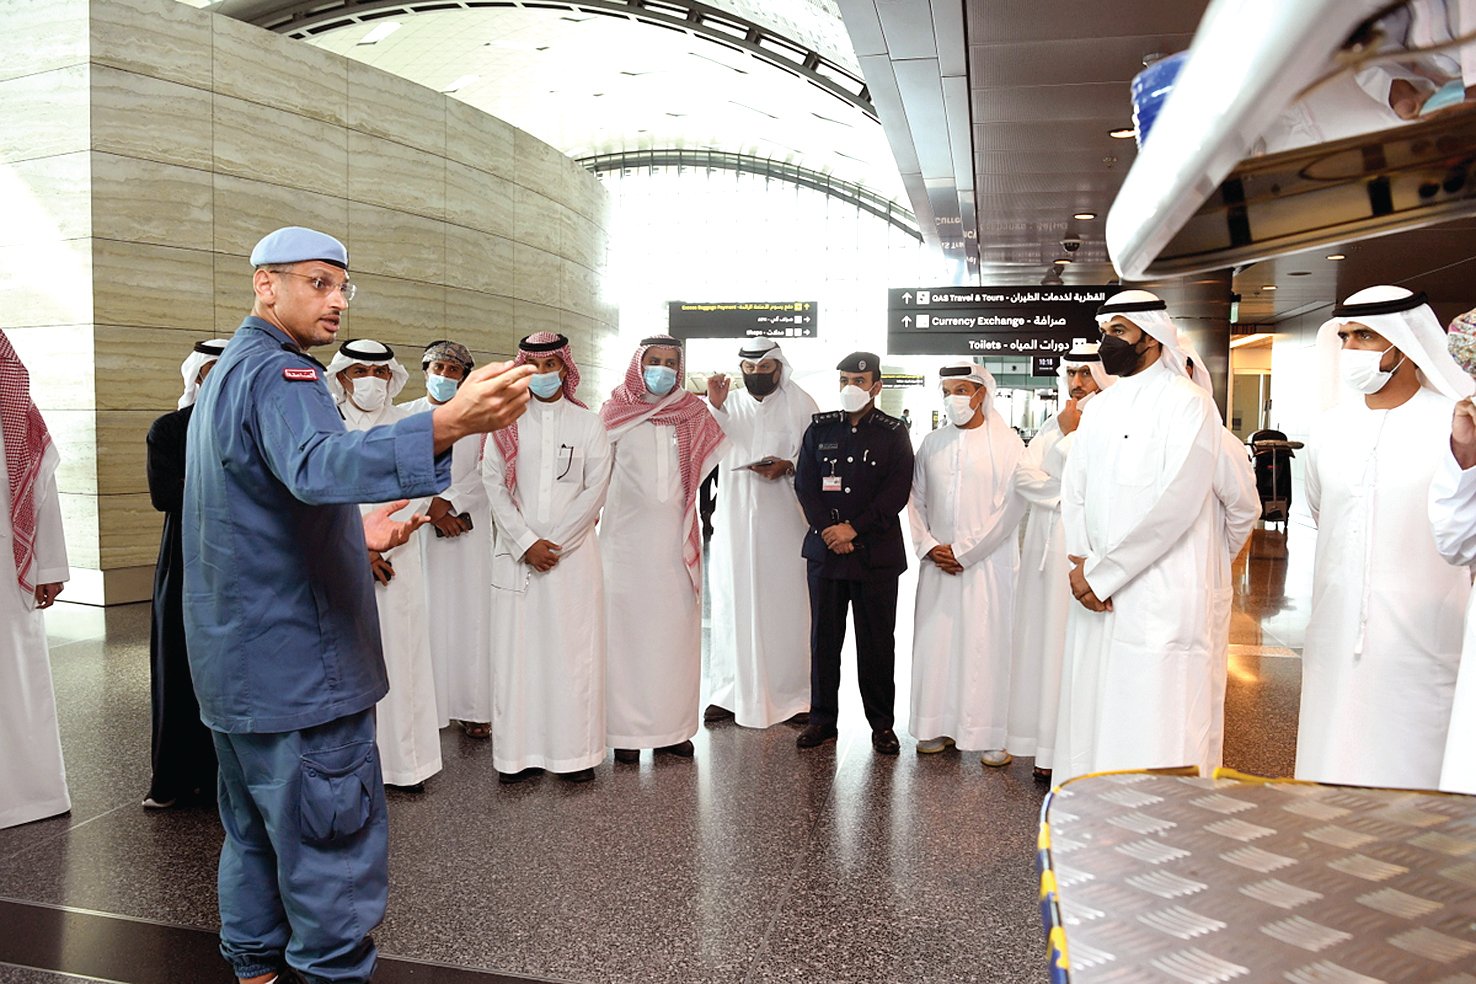 GCC Security Delegation Briefed on Modern Security Systems and Technologies at HIA